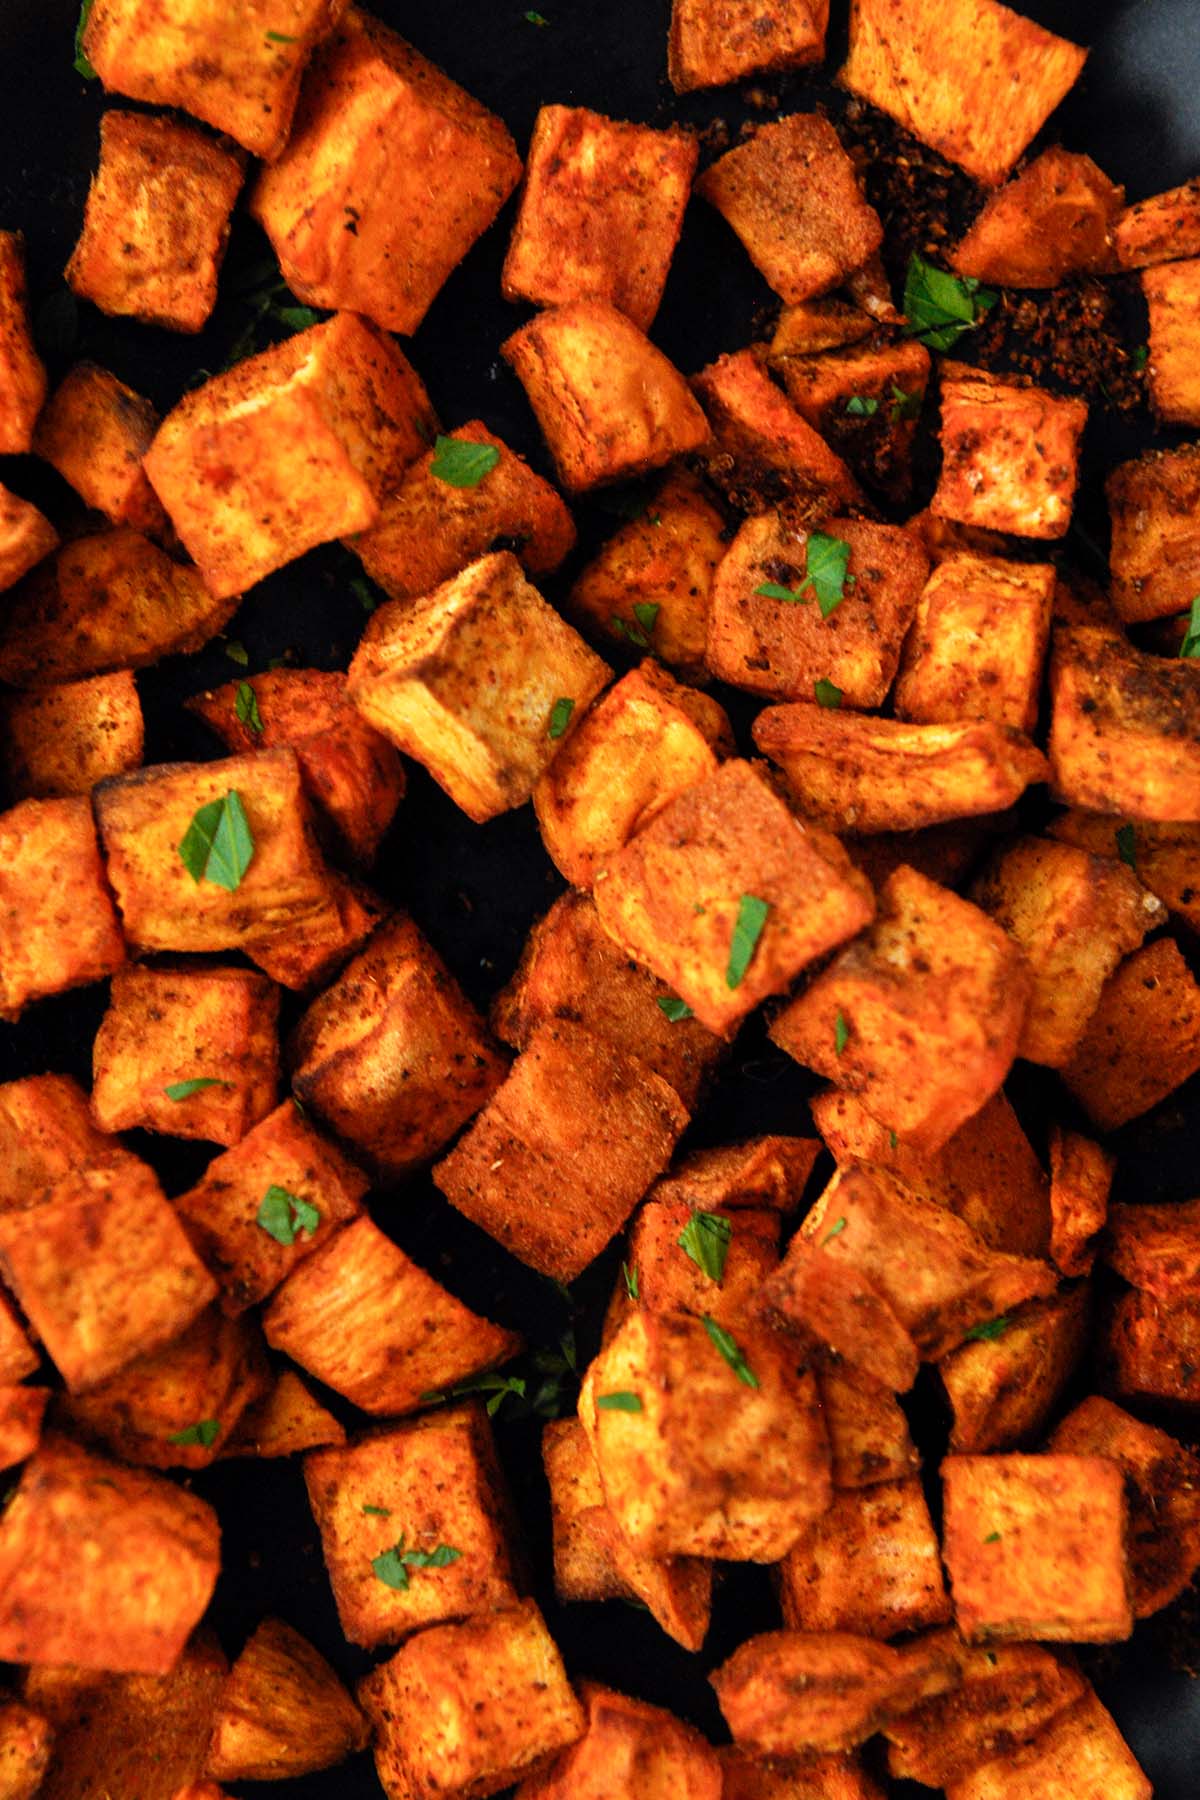 Very up close image of cubed sweet potatoes.